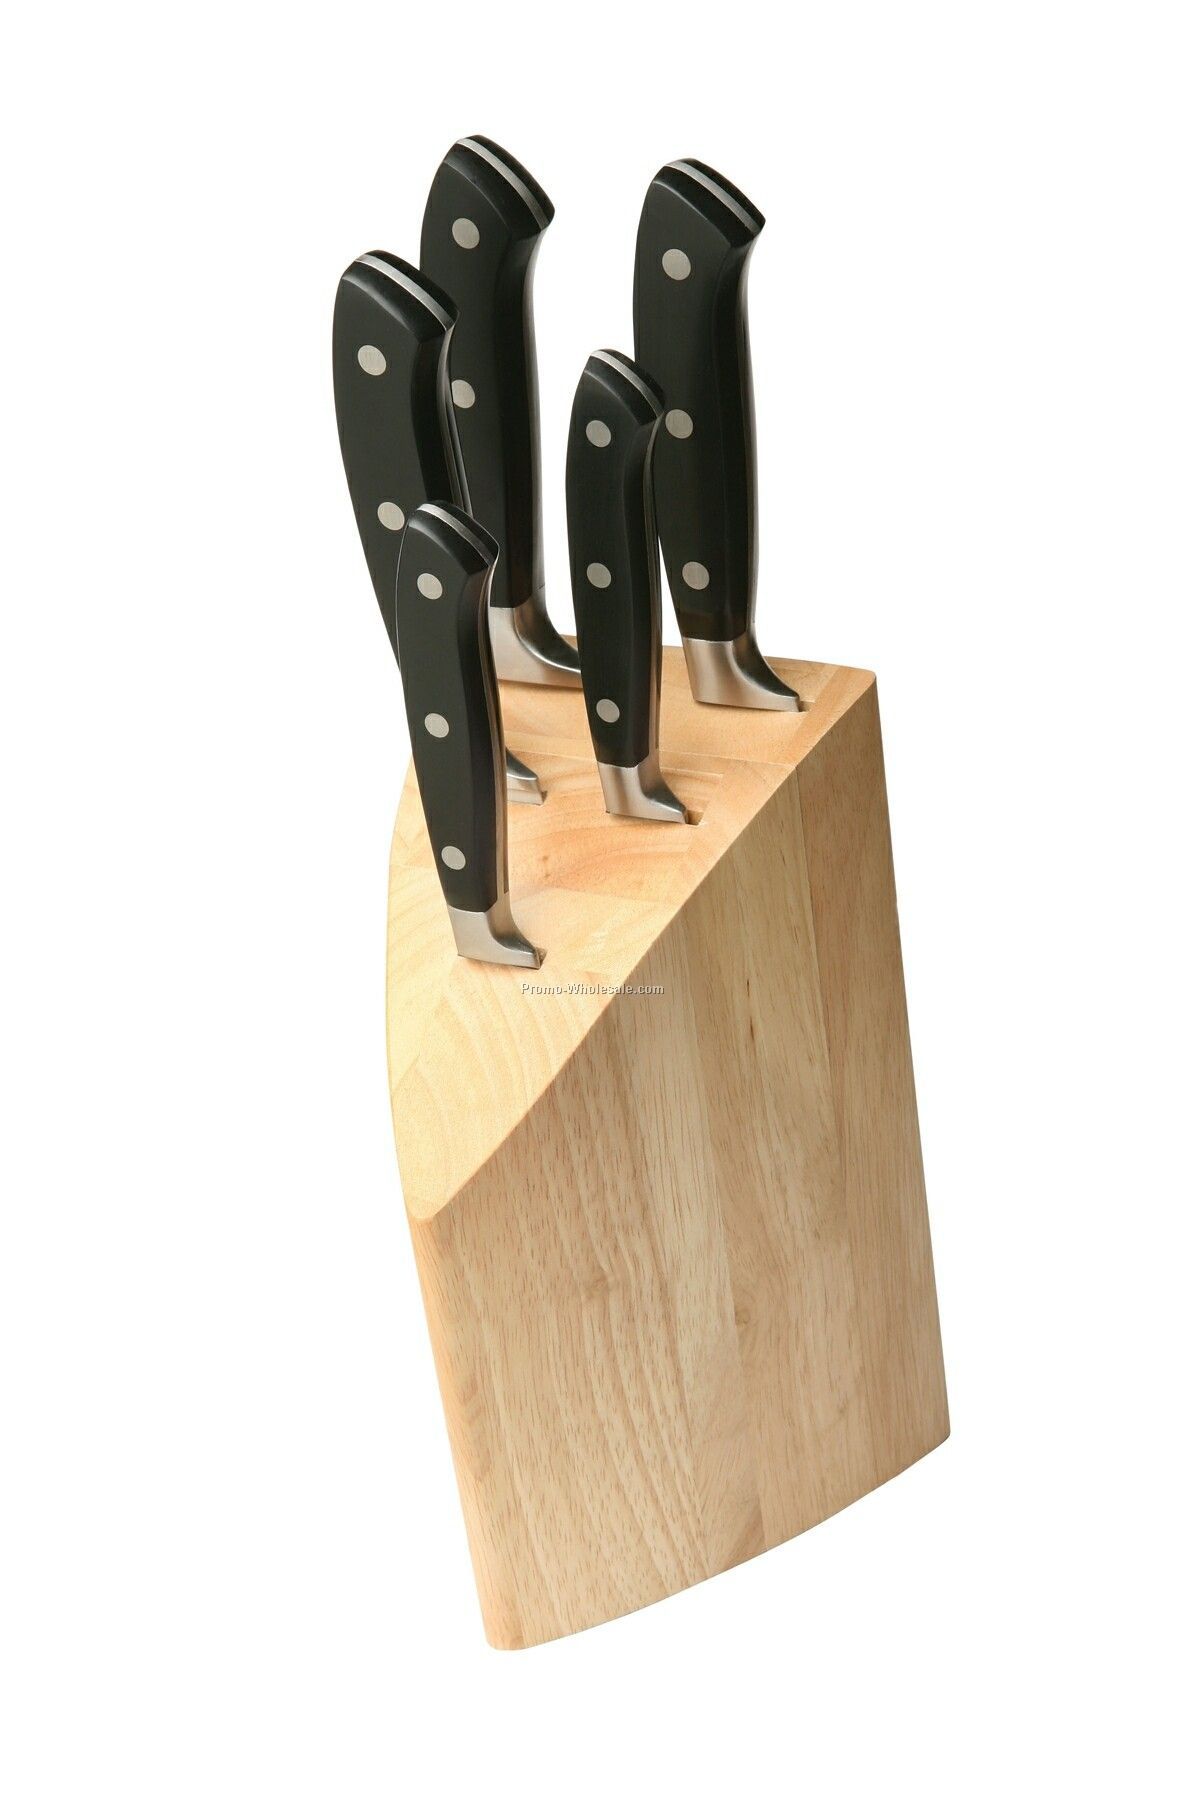 Knife Set With Wooden Stand